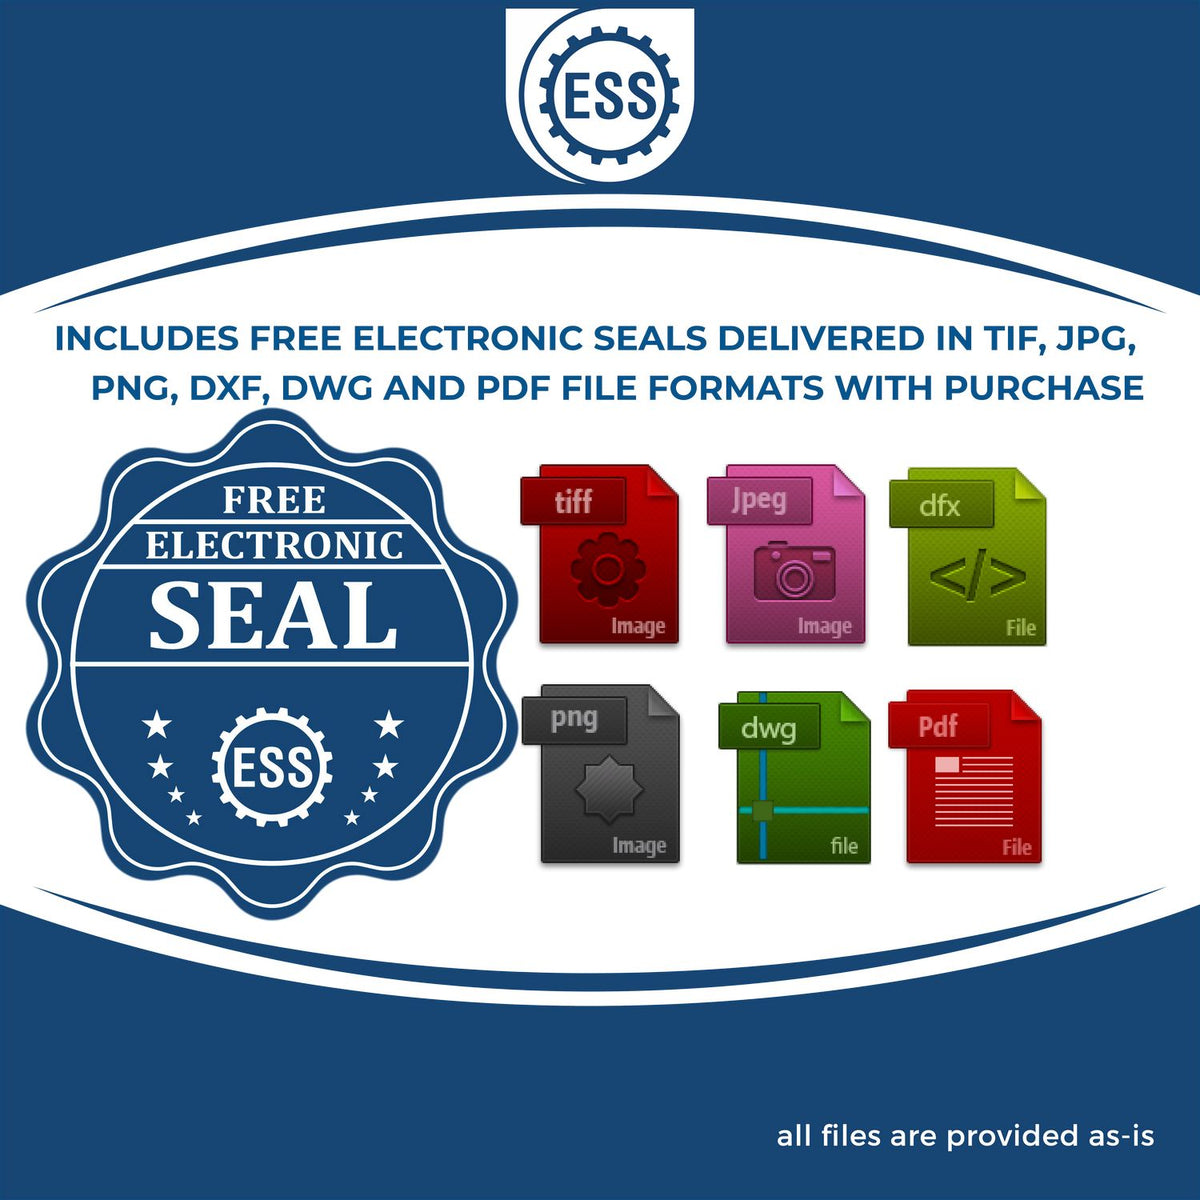 An infographic for the free electronic seal for the Slim Pre-Inked District of Columbia Land Surveyor Seal Stamp illustrating the different file type icons such as DXF, DWG, TIF, JPG and PNG.